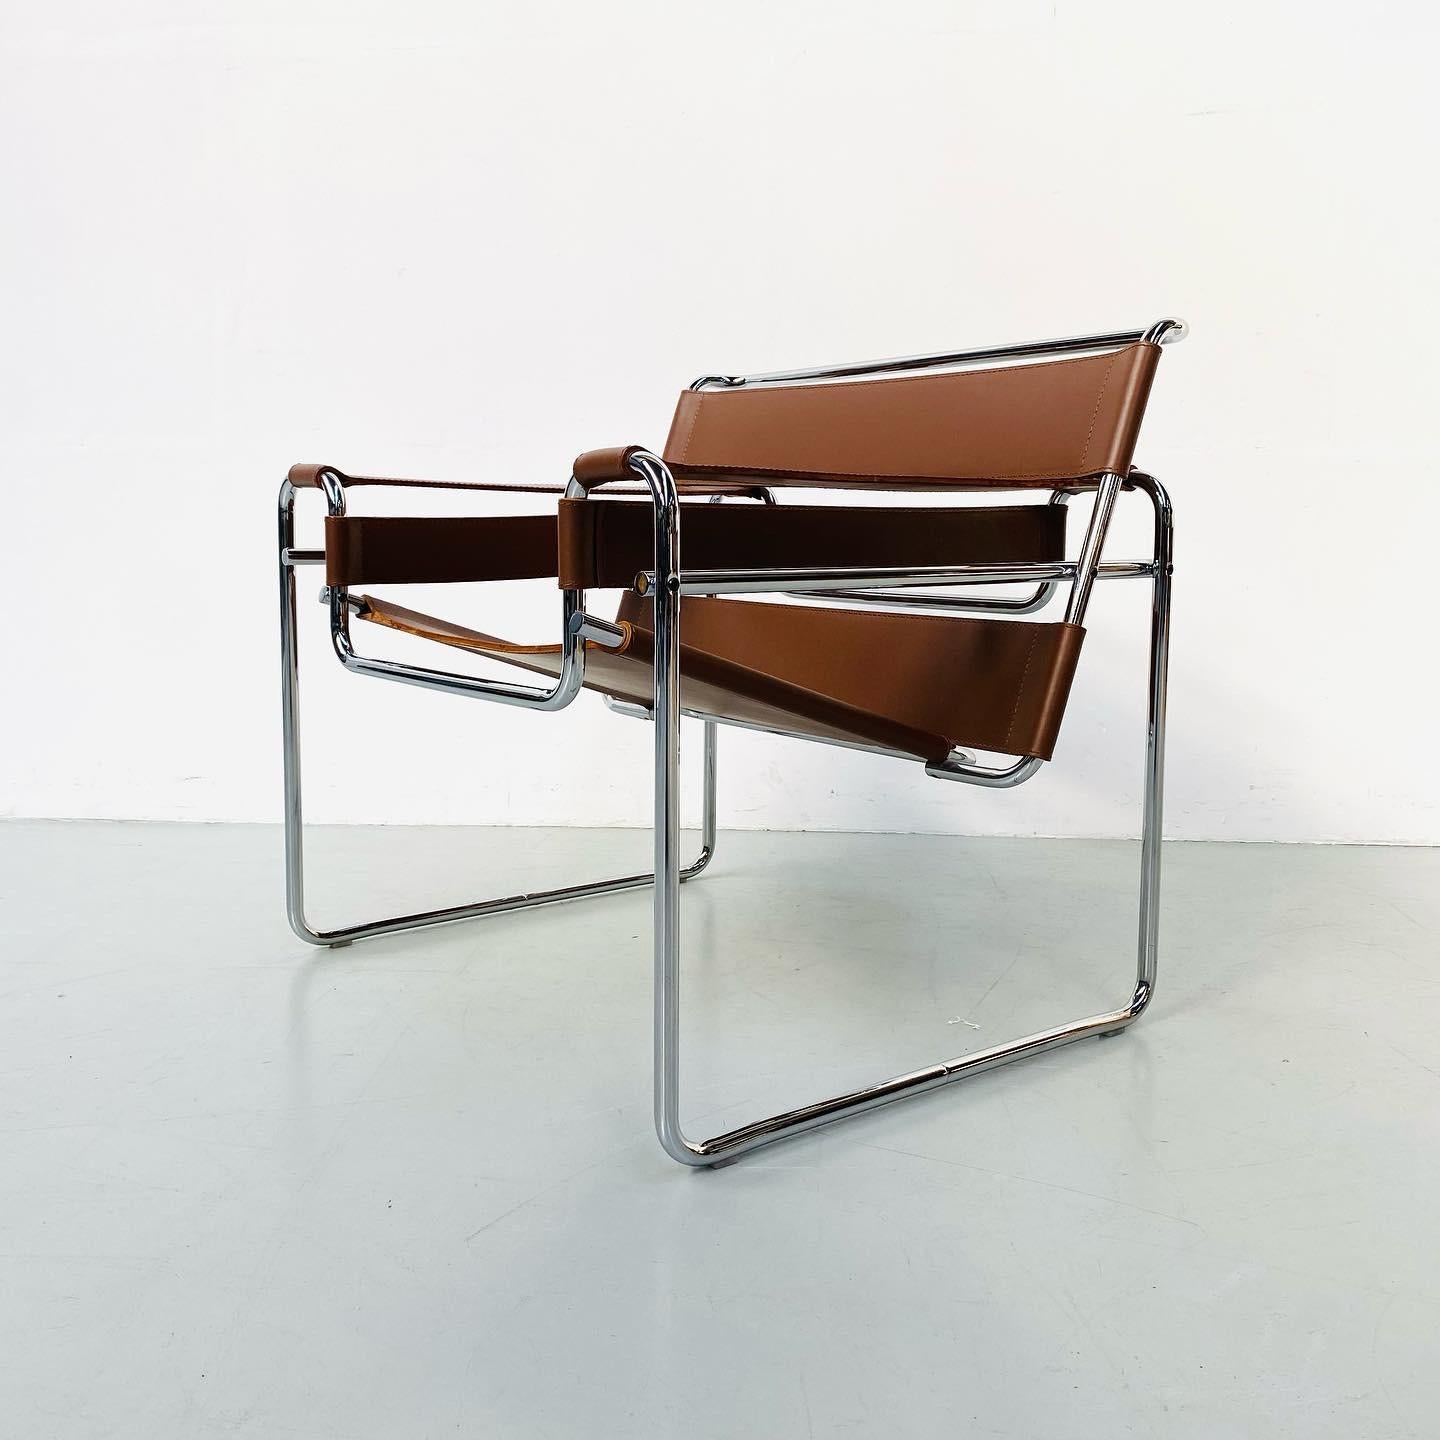 Bauhaus Cognac Leather B3 Wassily Chair by Marcel Breuer for Knoll Studio, 1980s